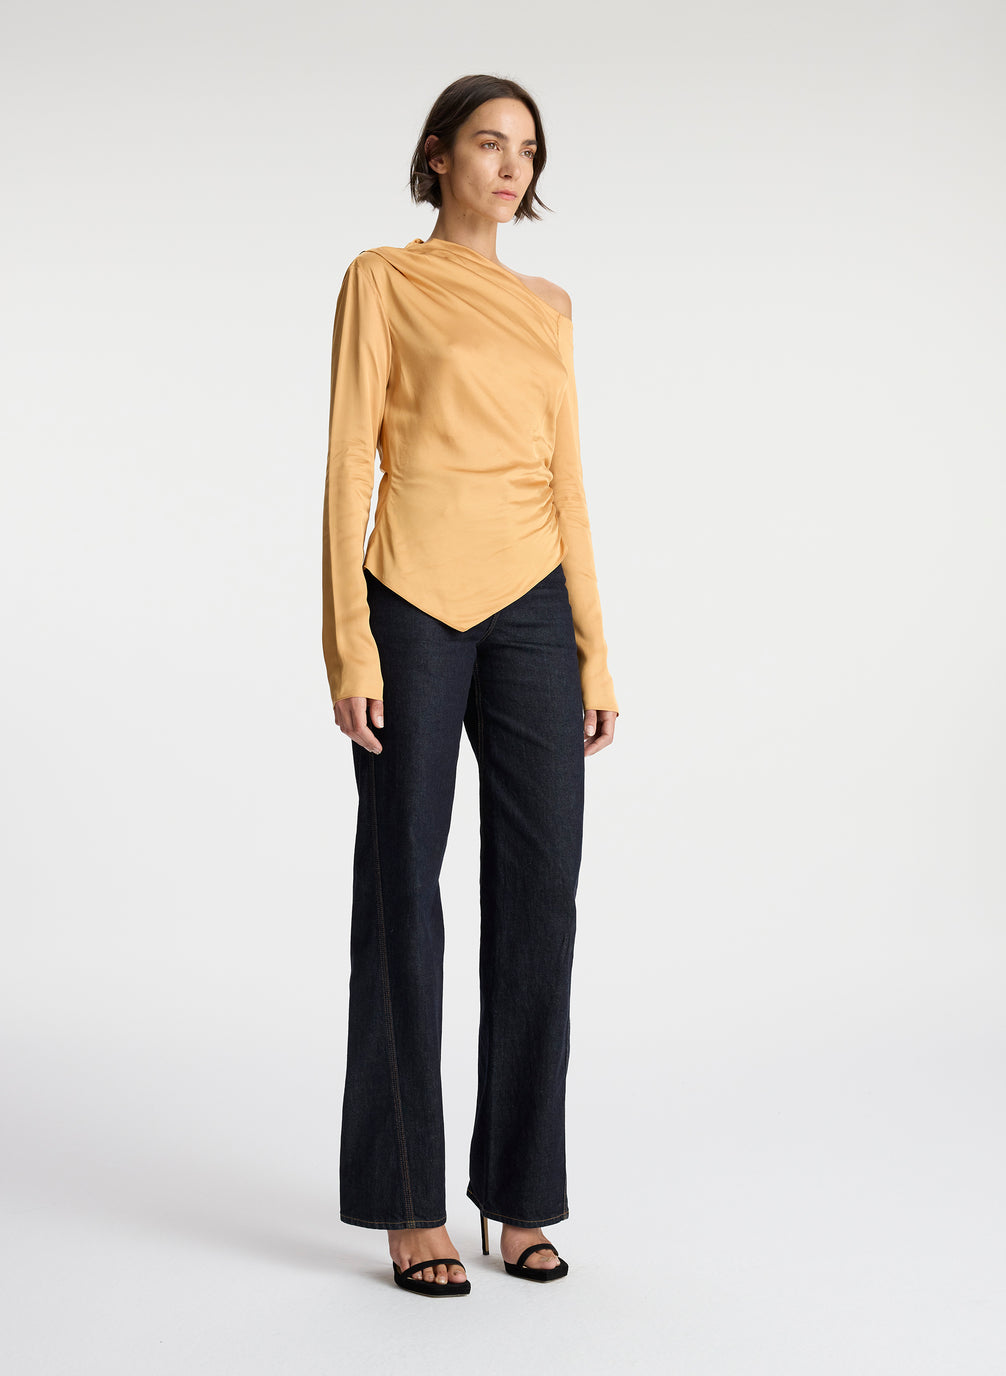 side view of woman wearing asymmetric gold satin long sleeve top and dark wash denim jeans